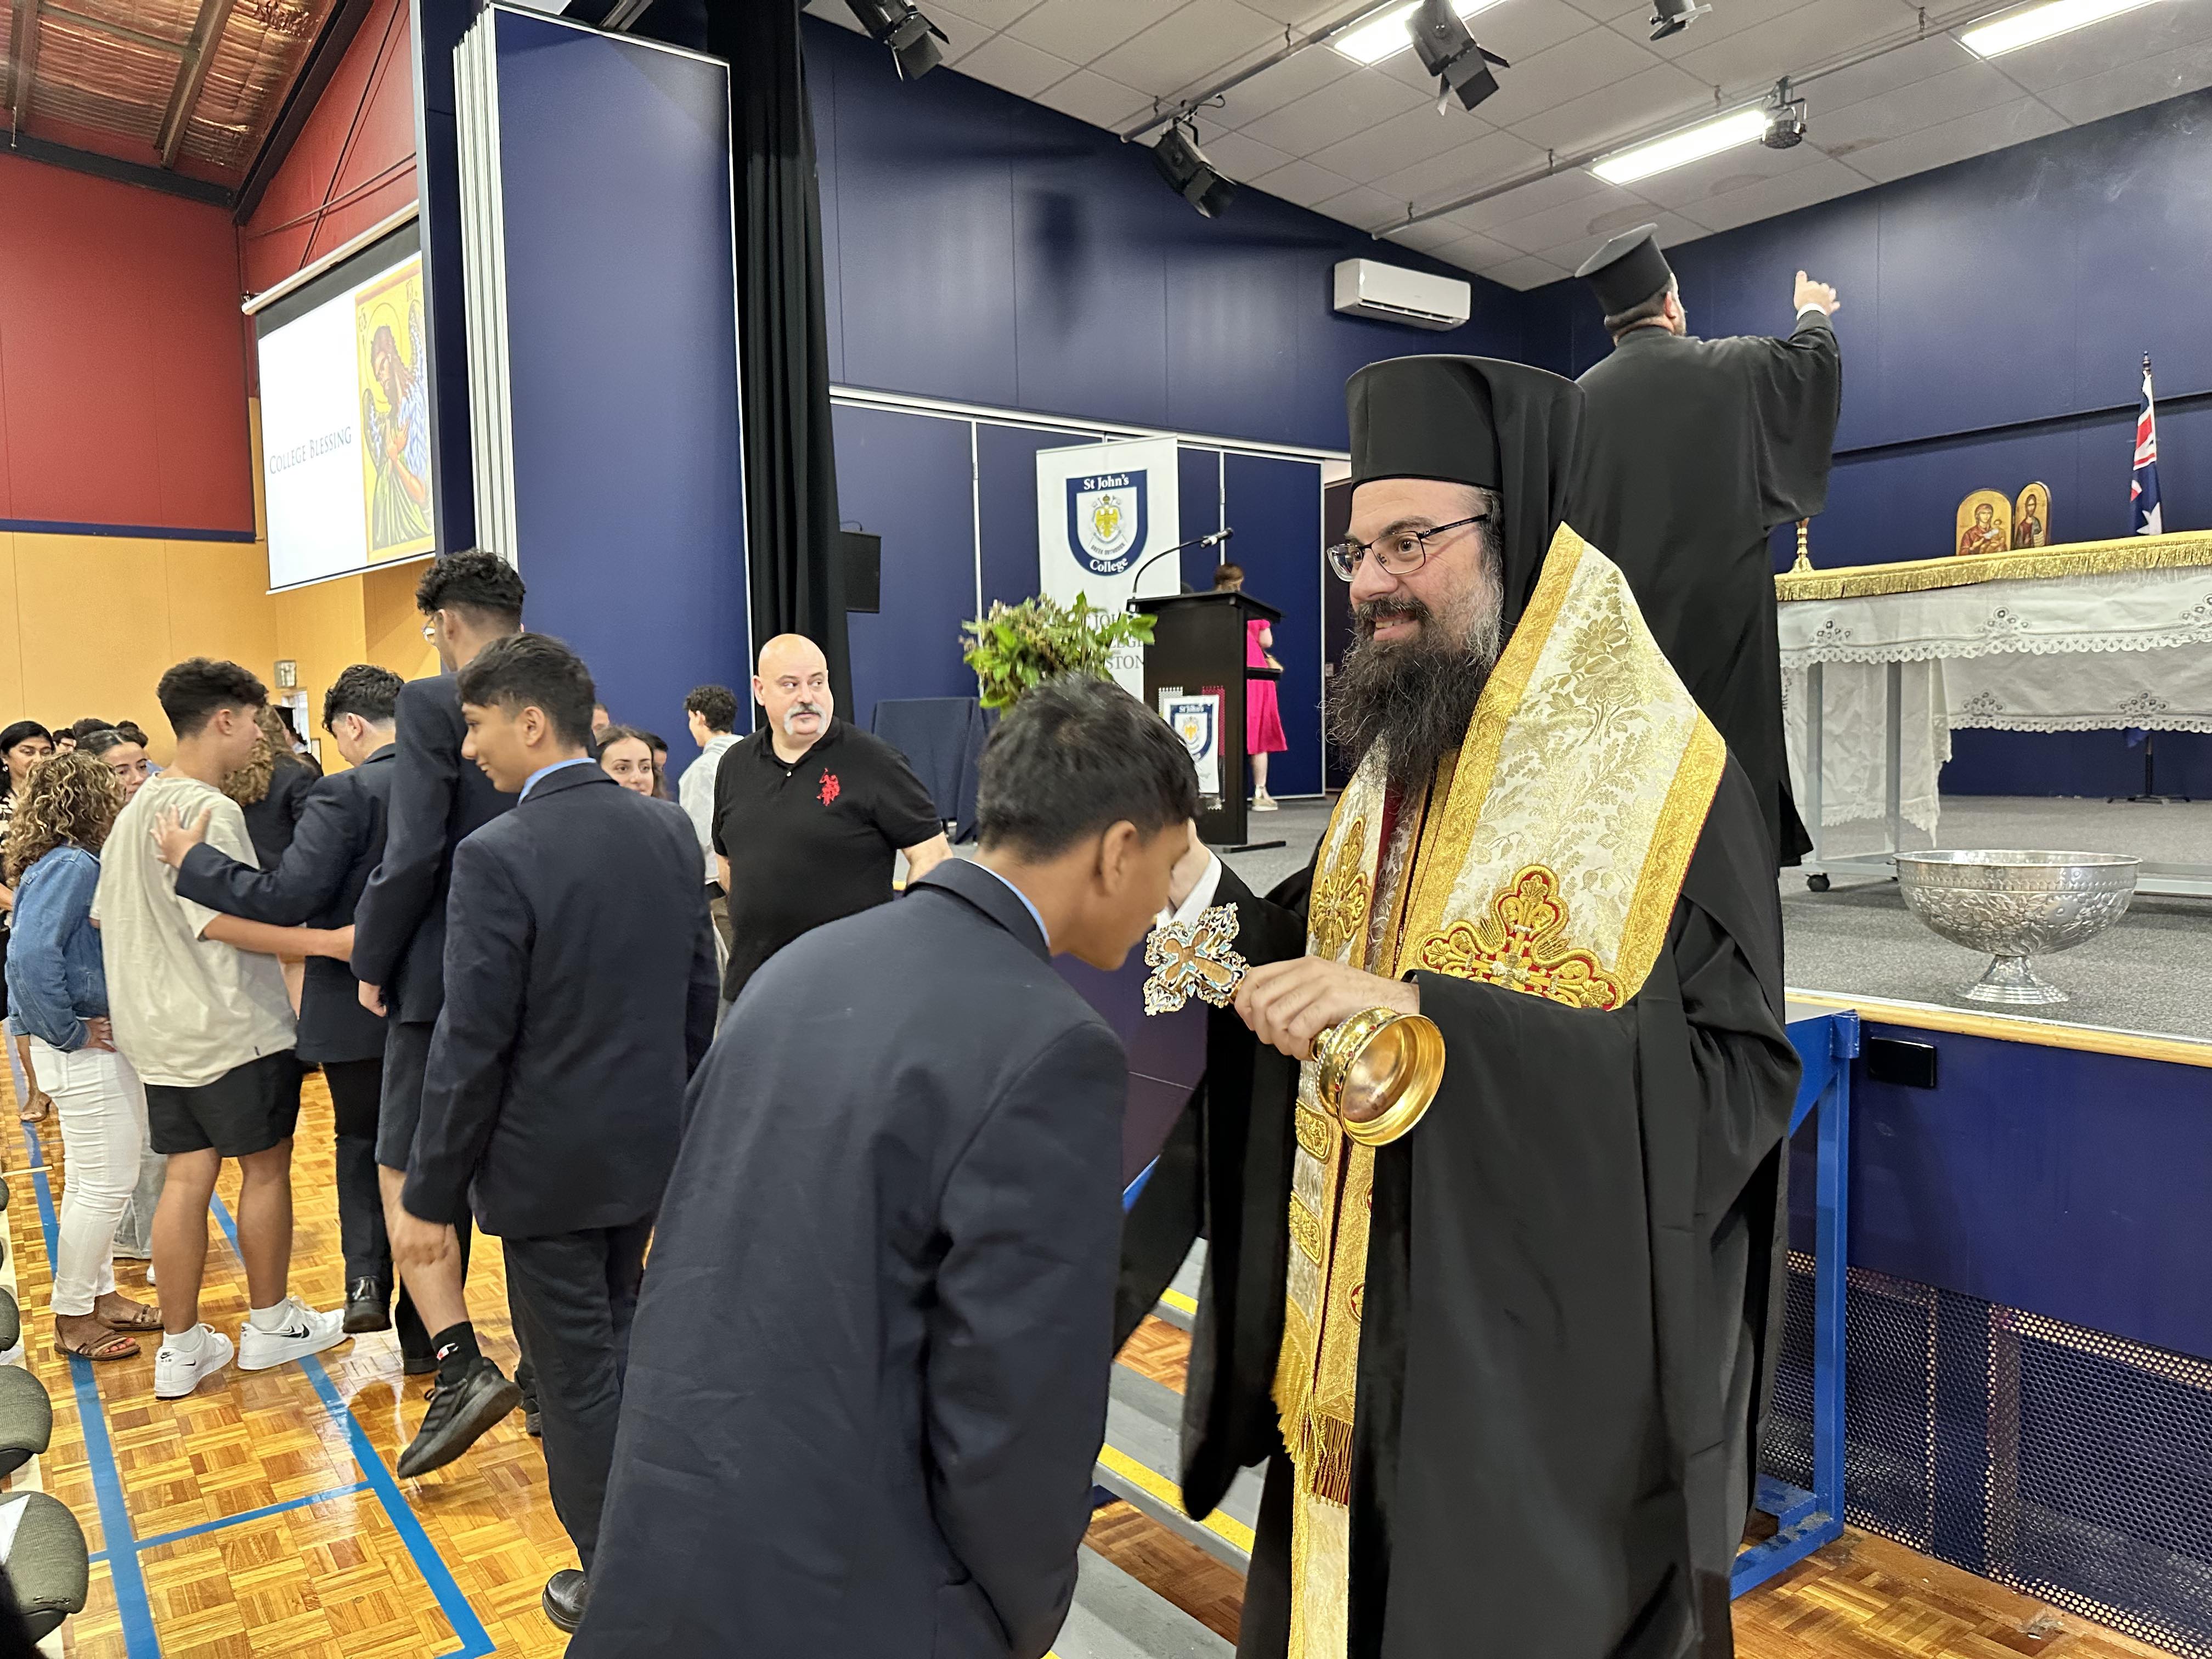 Agiasmos Service for the beginning of the new school year at Saint John’s College, Melbourne